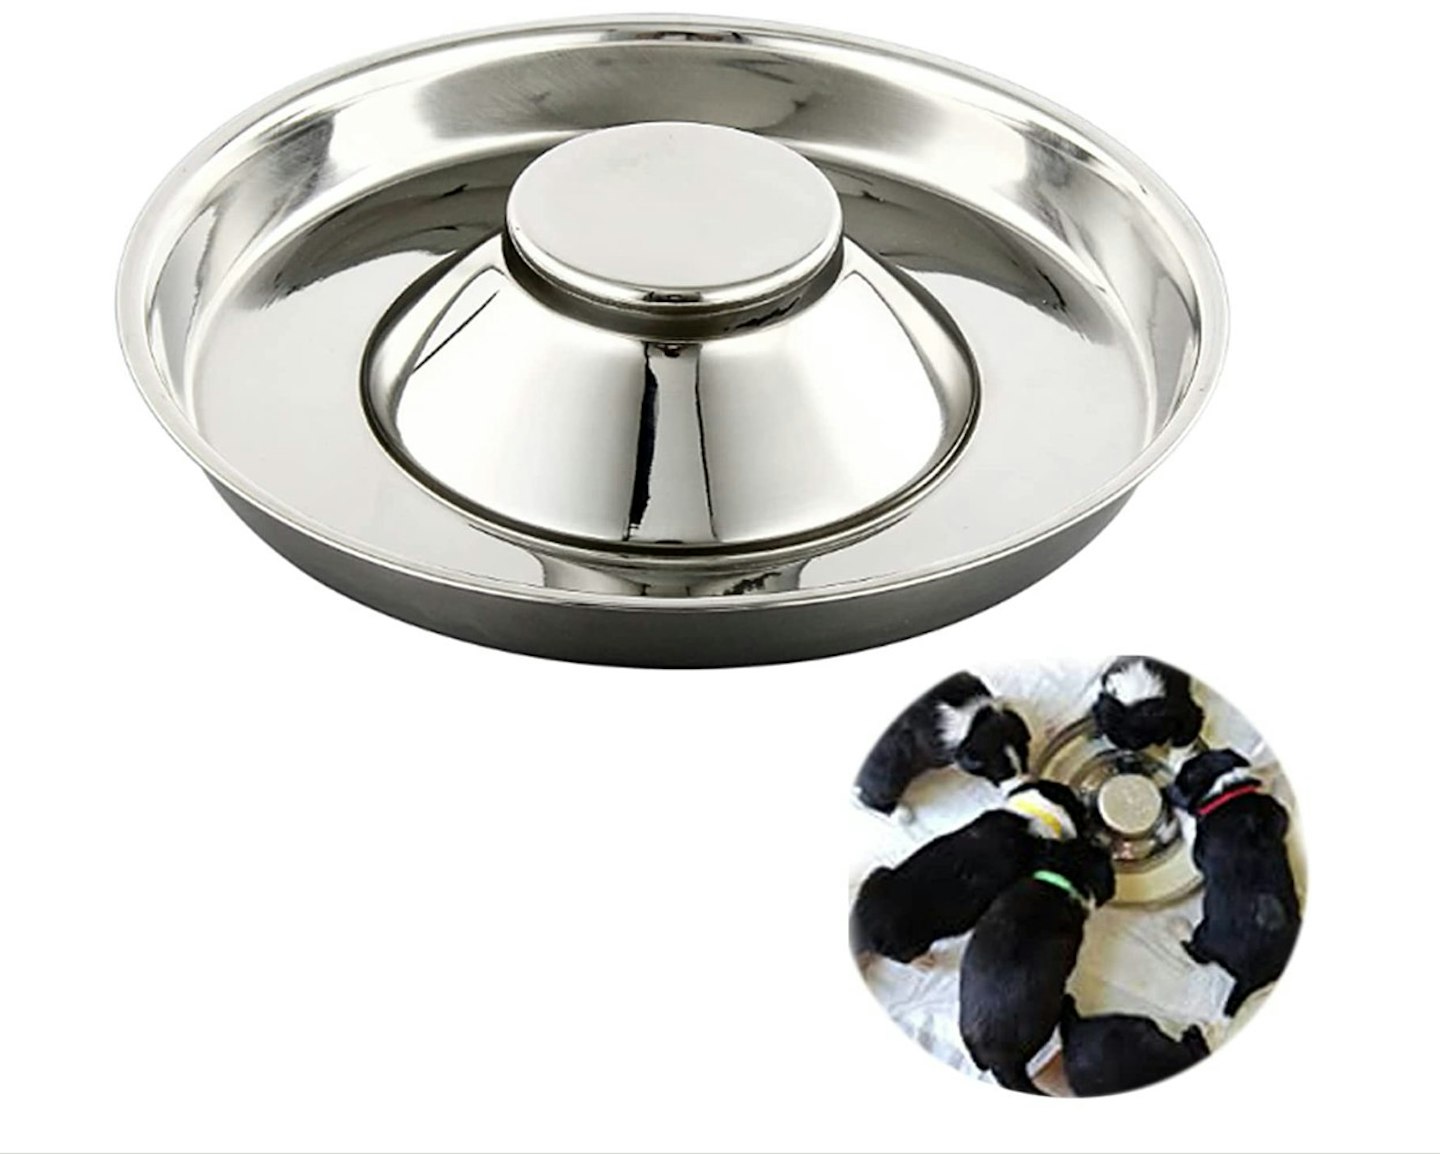 https://images.bauerhosting.com/marketing/sites/22/2023/07/Yudansi-Stainless-Steel-Puppy-Weaning-BowlsCat-Bowls-for-Food-Water.jpg?auto=format&w=1440&q=80